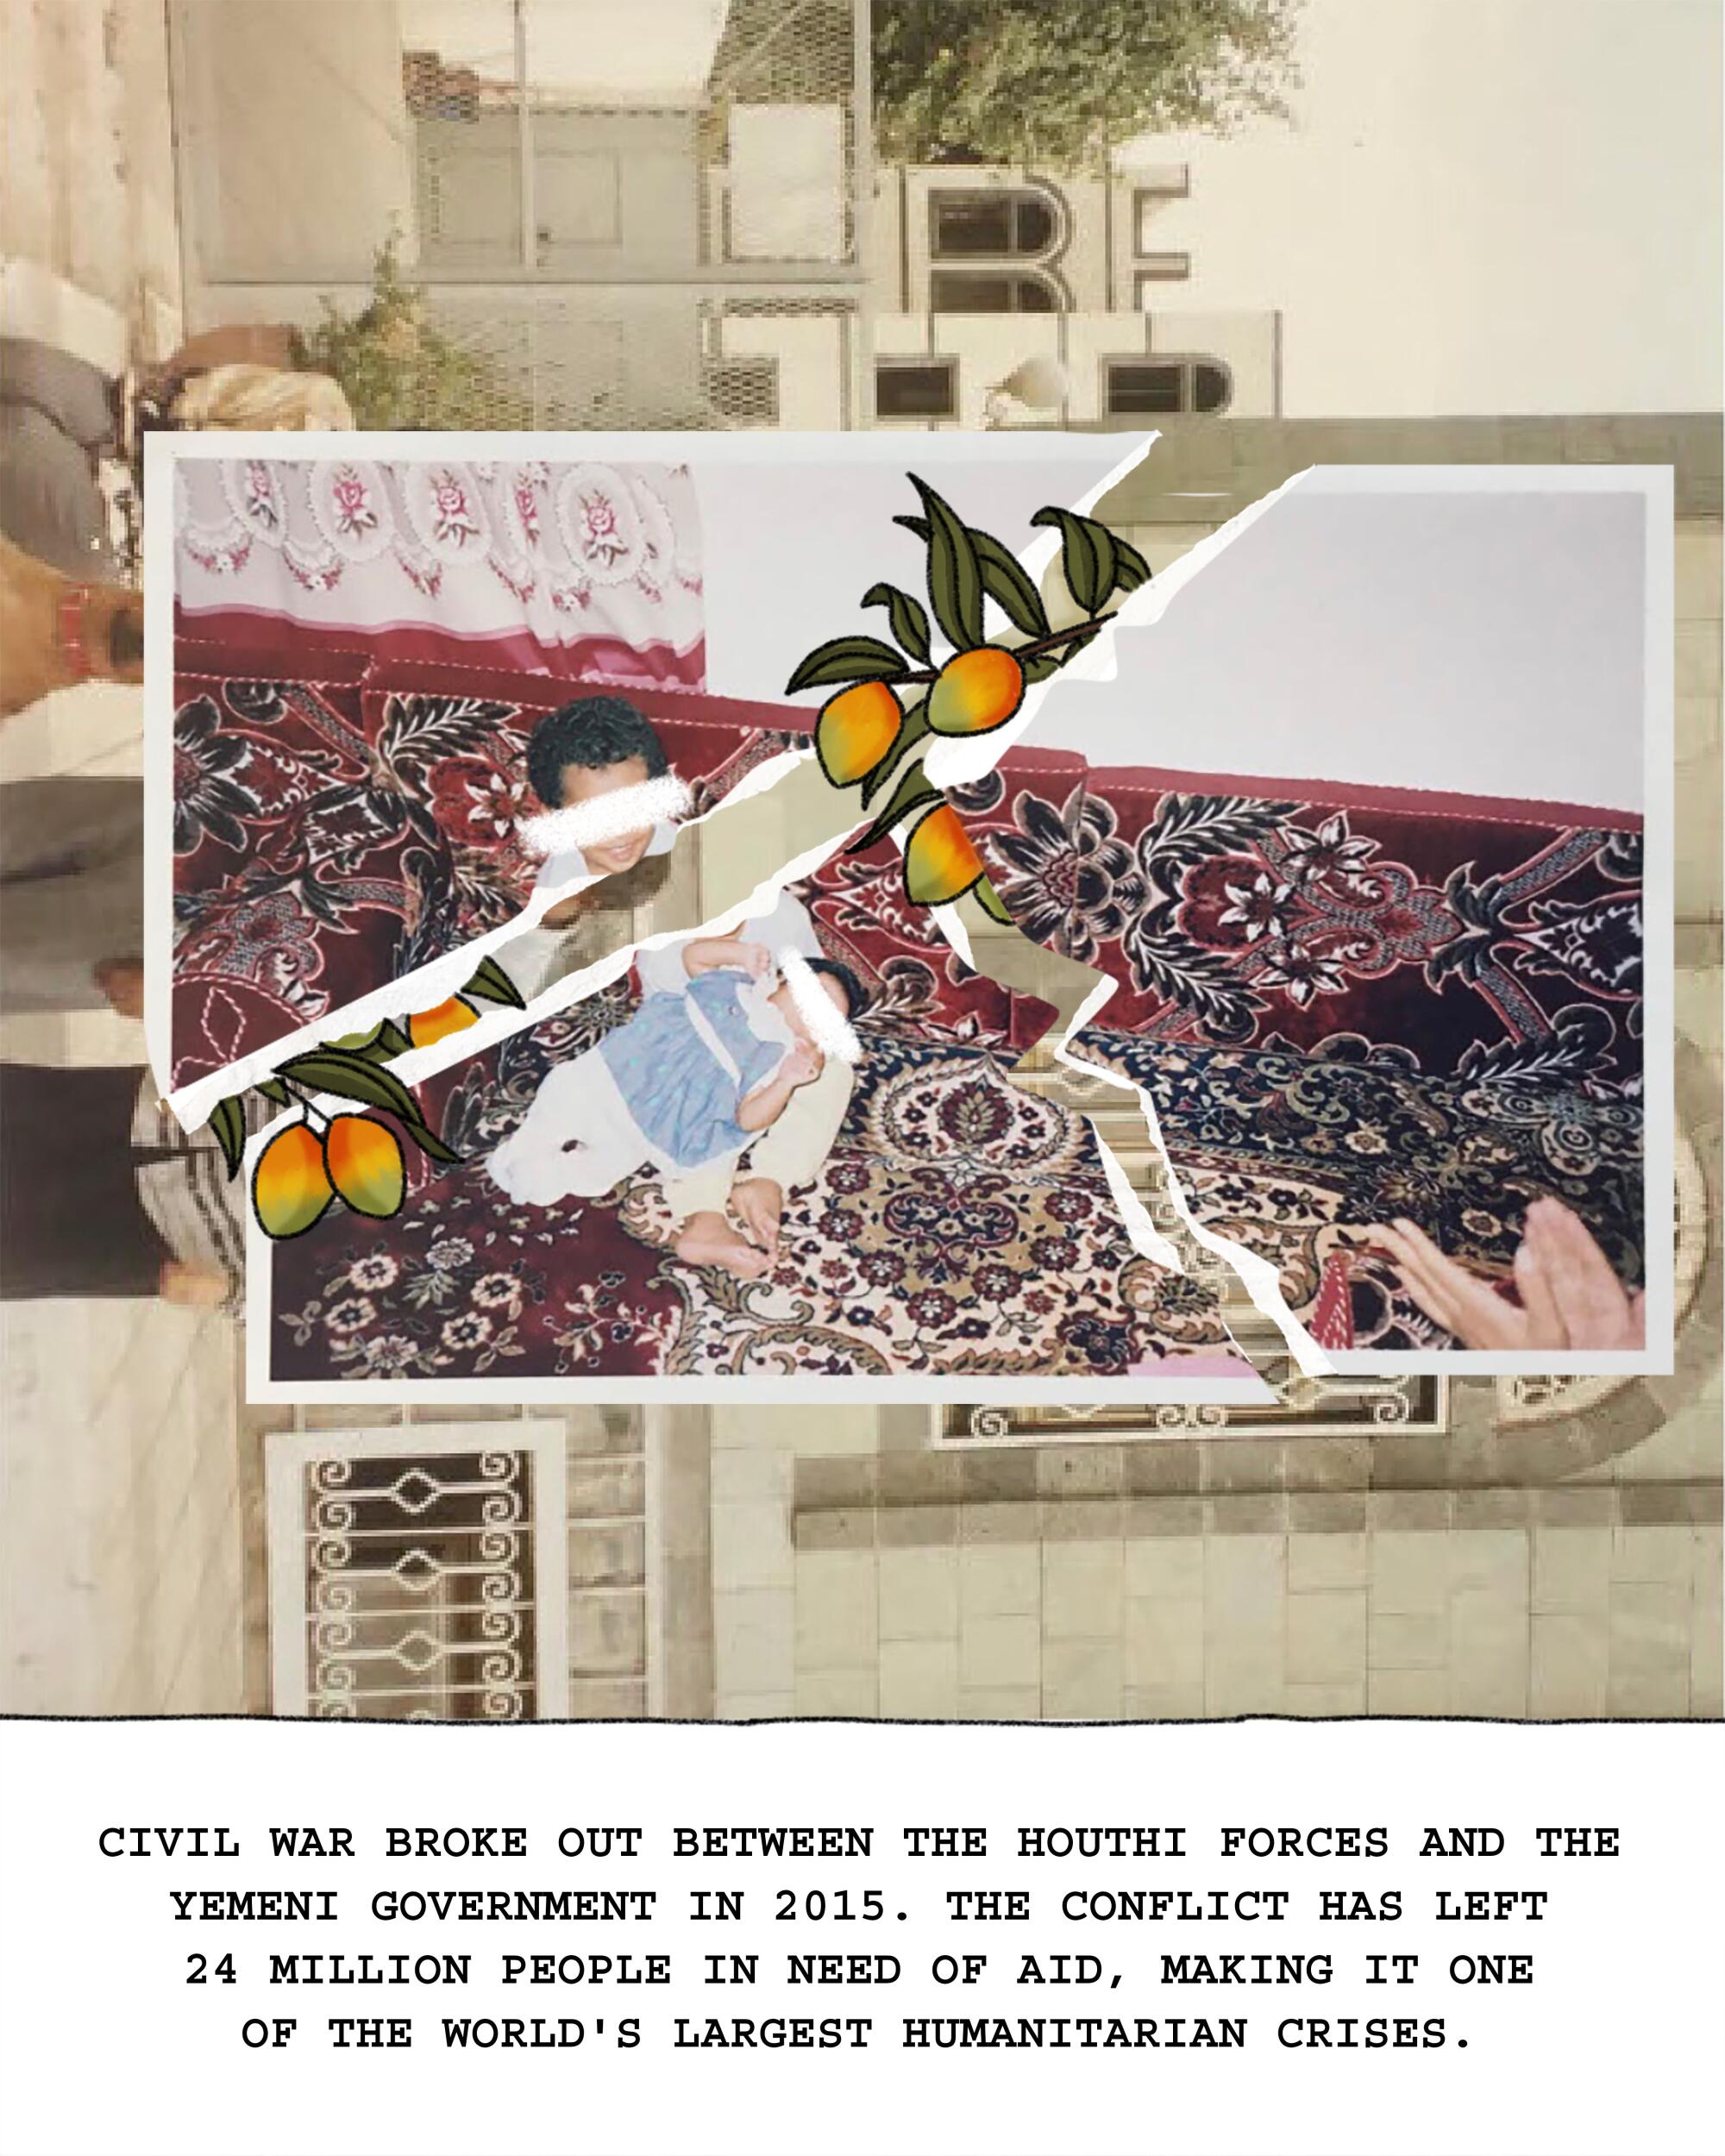 collage of mangoes and a torn family photo. Civil war broke out in Yemen in 2015, leaving 24 million people in need of aid.